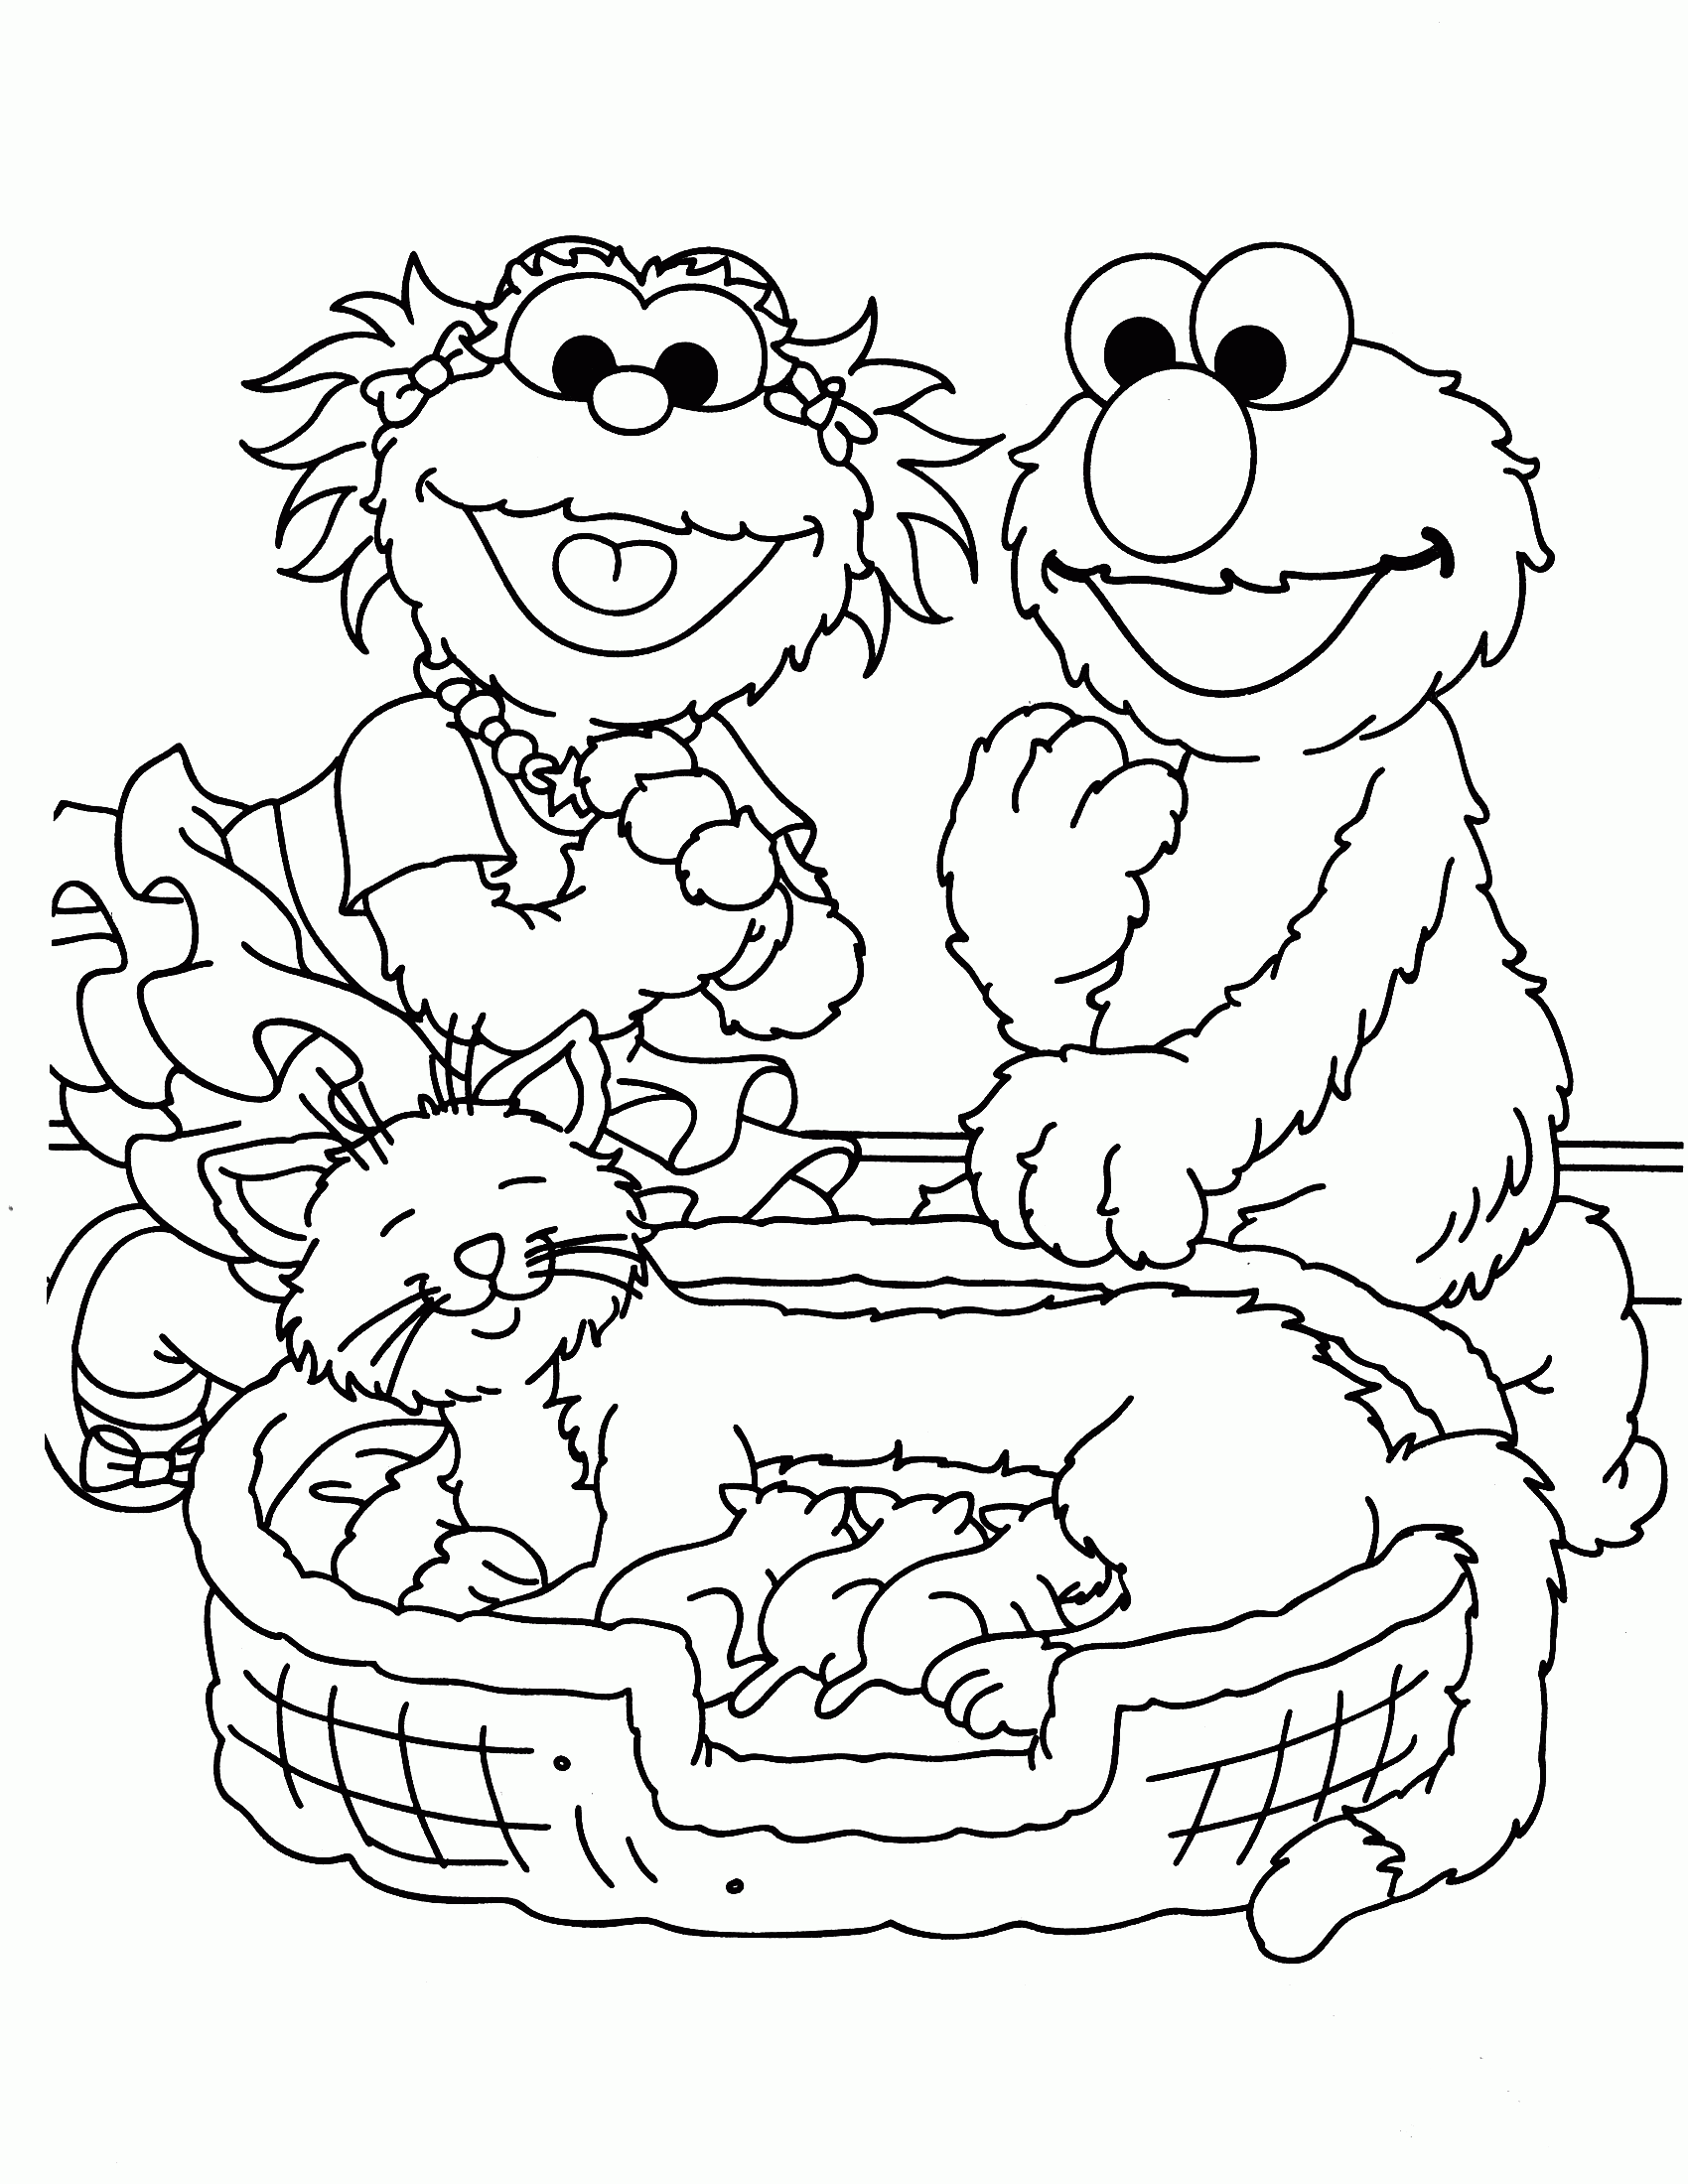 Sesame Street Coloring Pages For Toddlers - Coloring Home